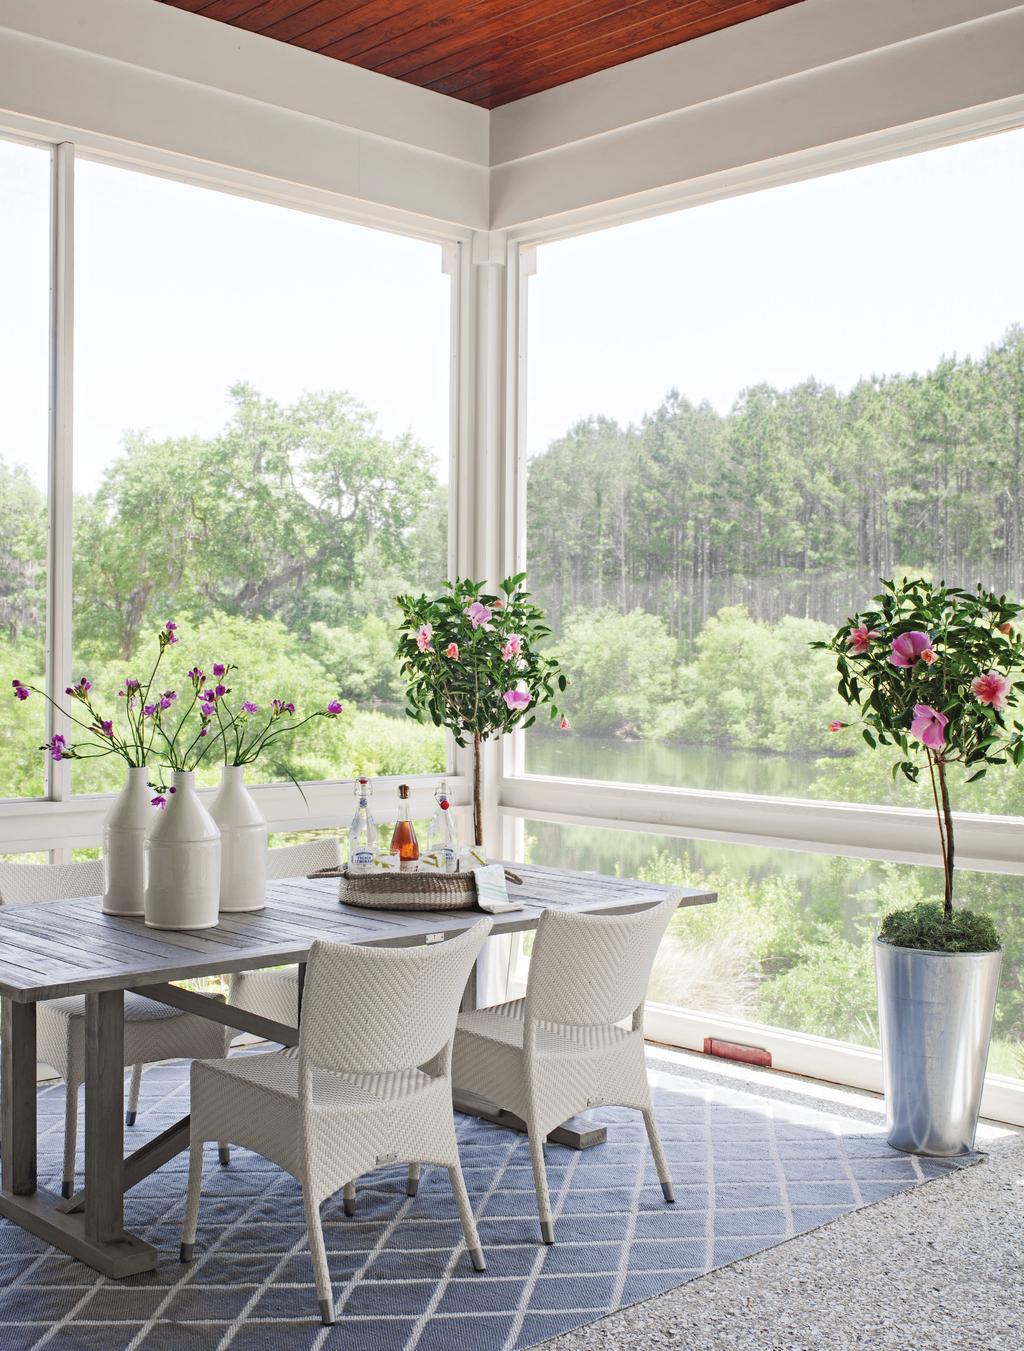 This photo: The screen porch with its view of the